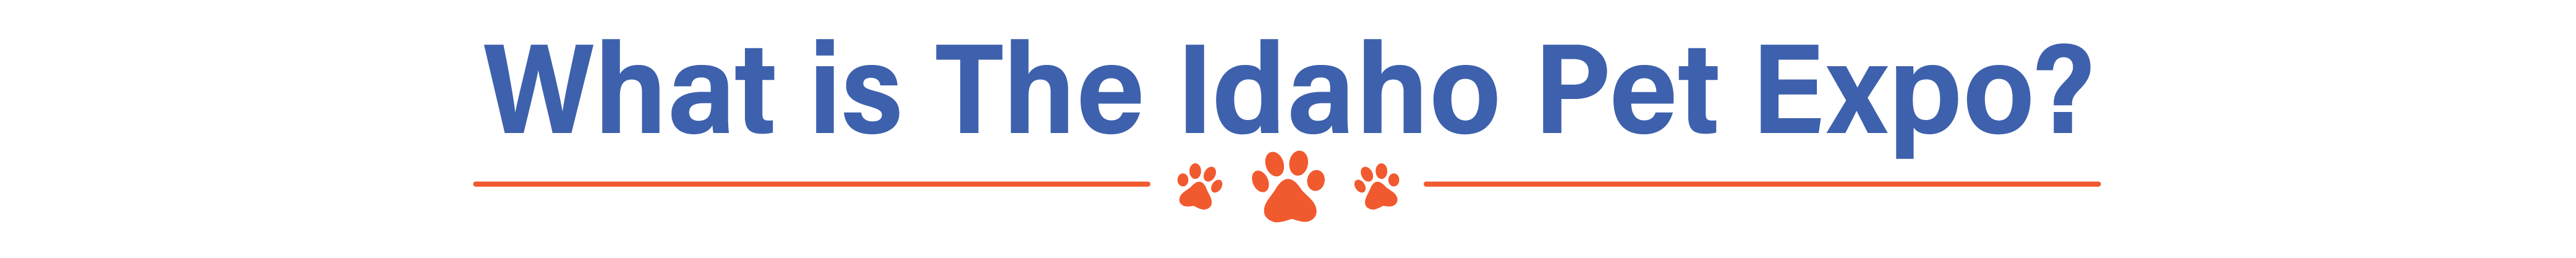 What is the Idaho Pet Expo